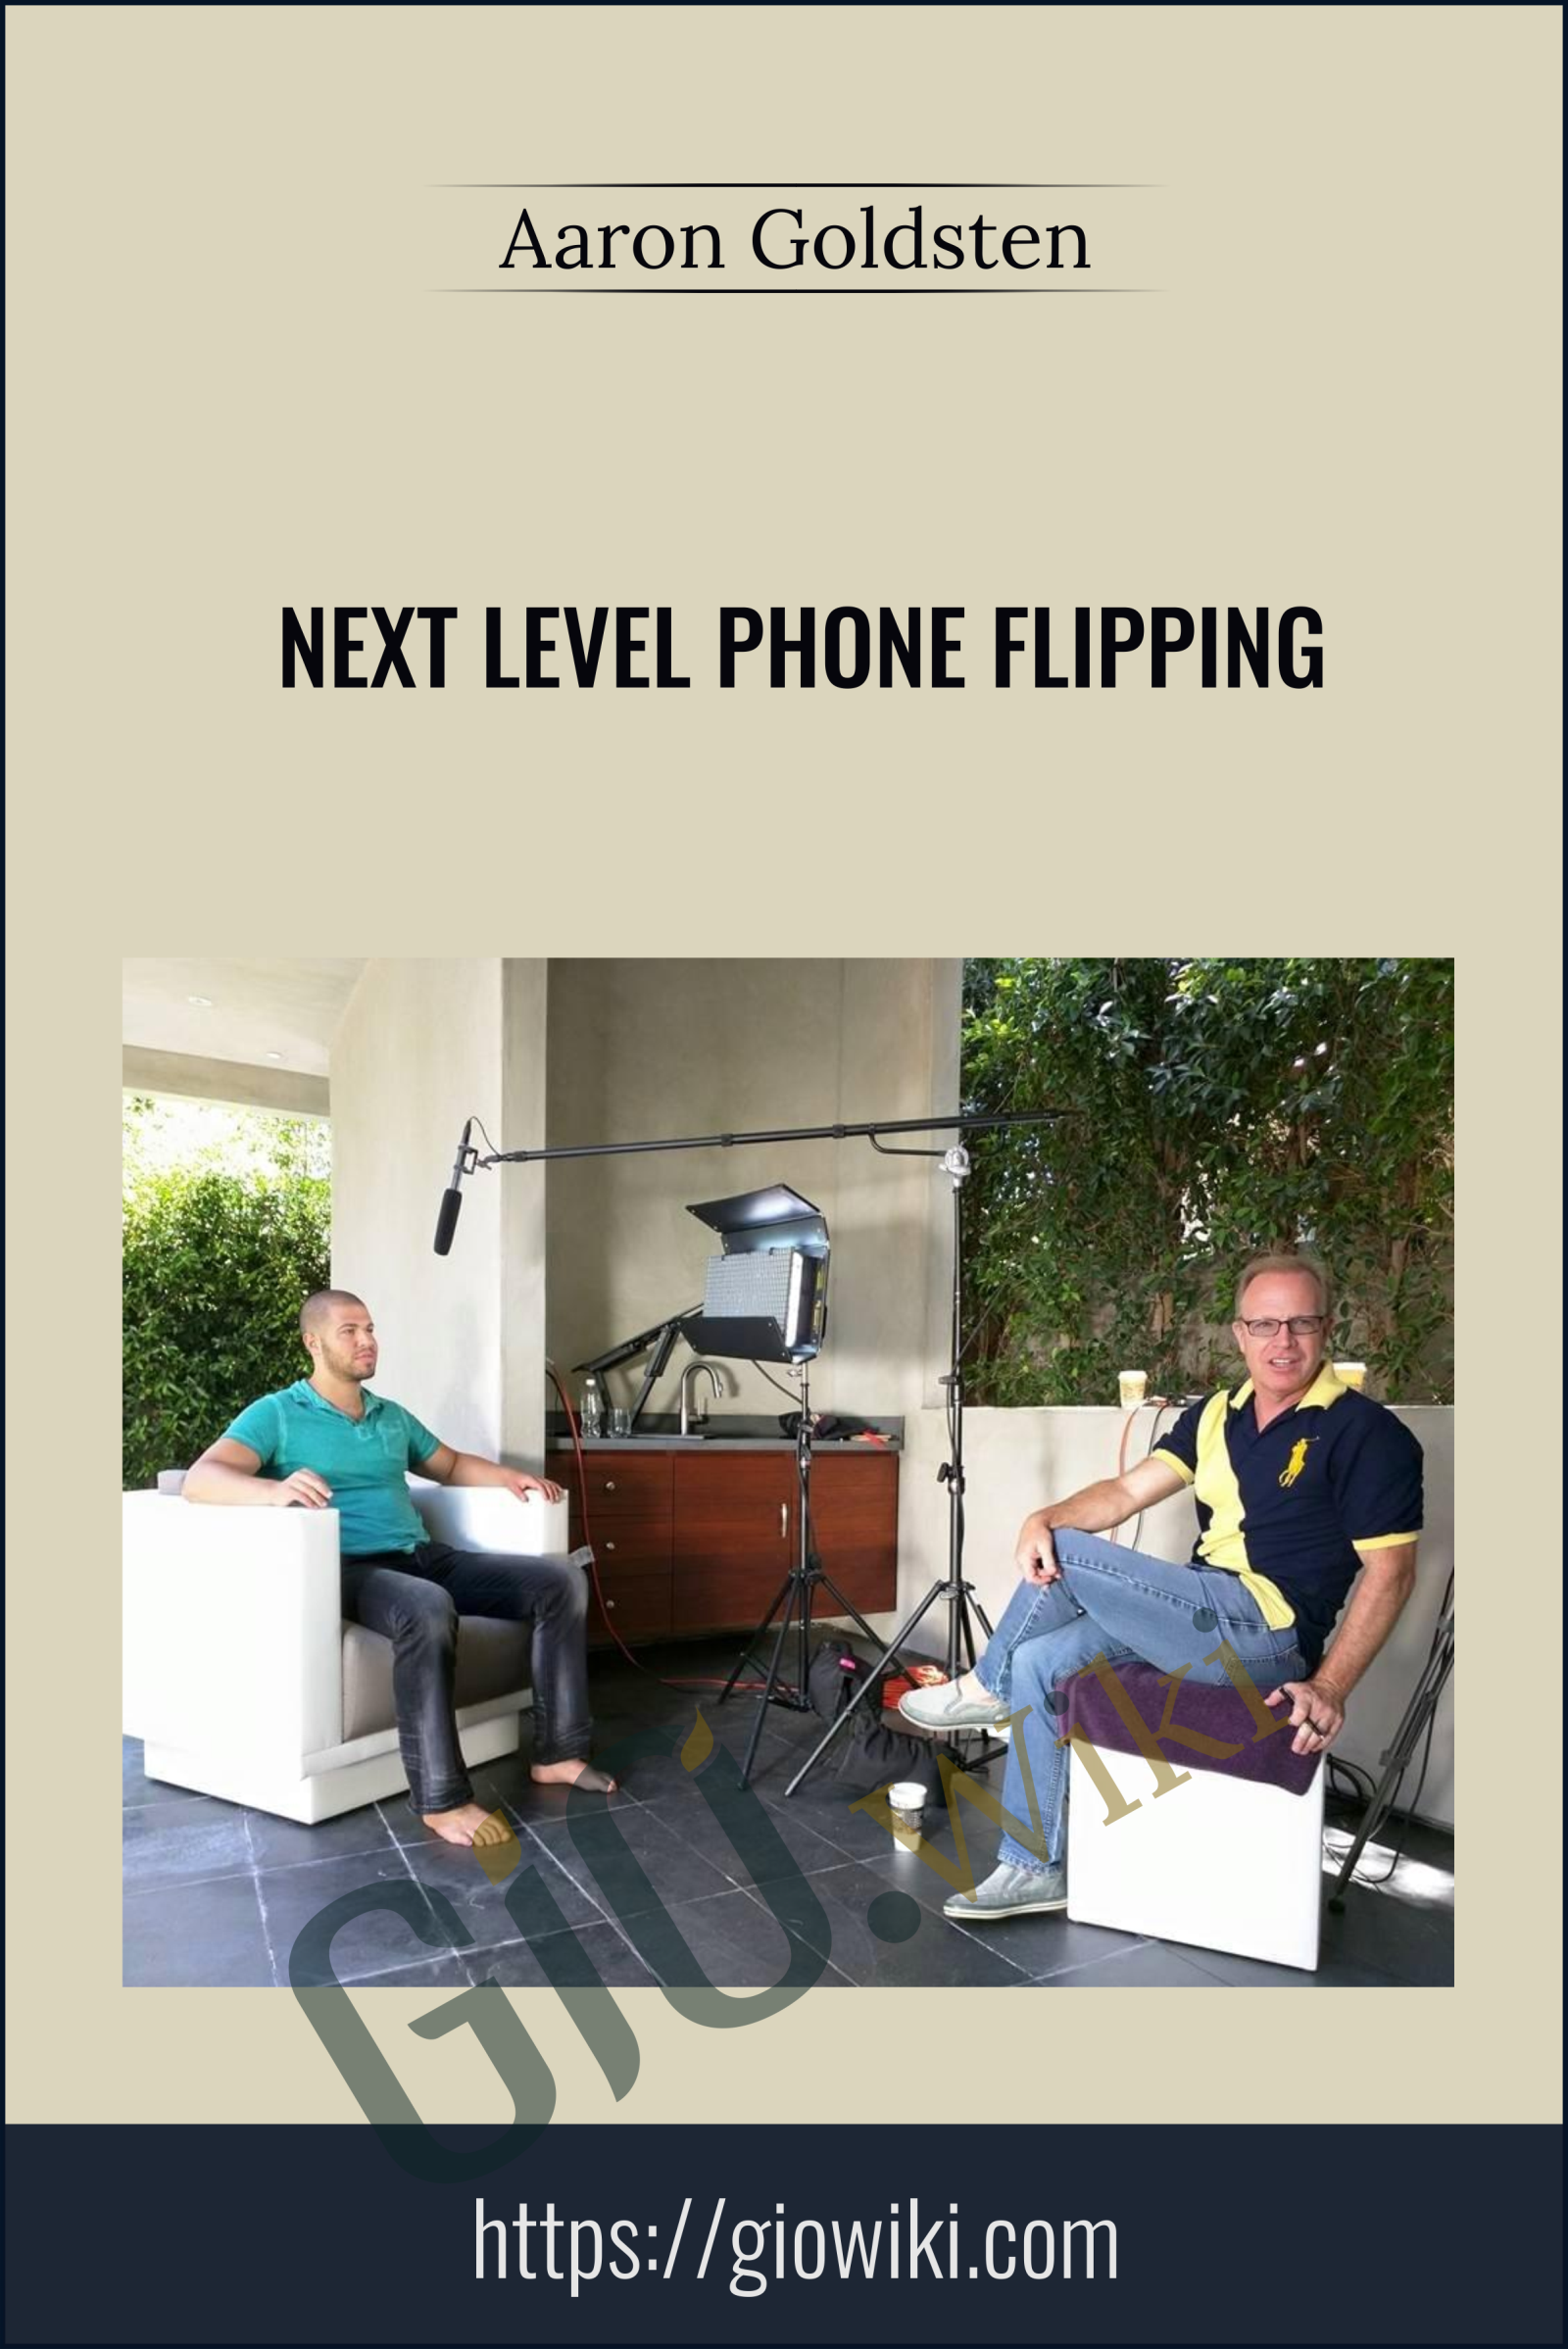 Next Level Phone Flipping - eBokly - Library of new courses!